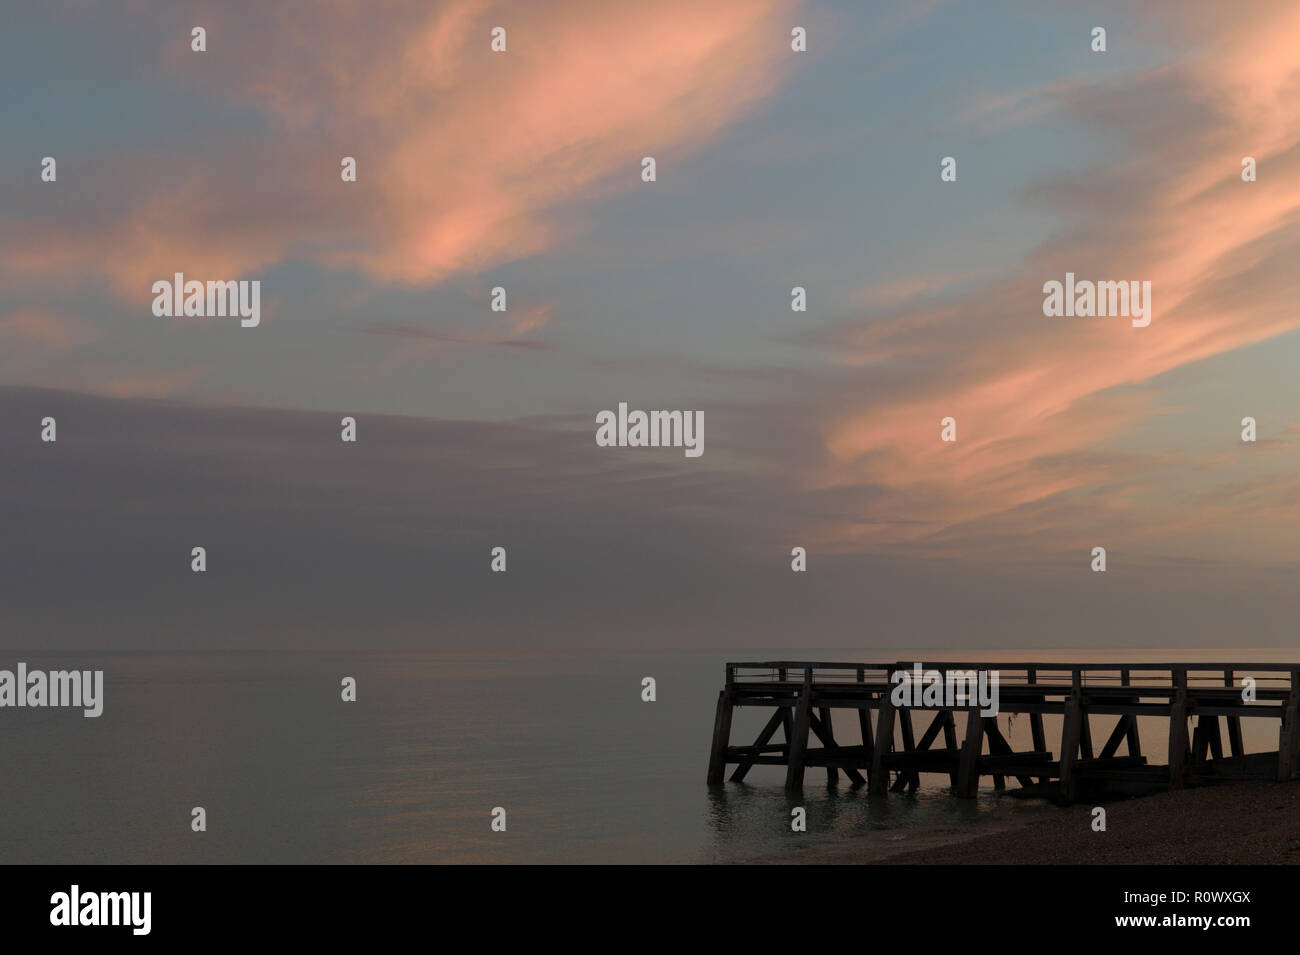 Sunrise clouds over wooden jetty, Normandy, France Stock Photo